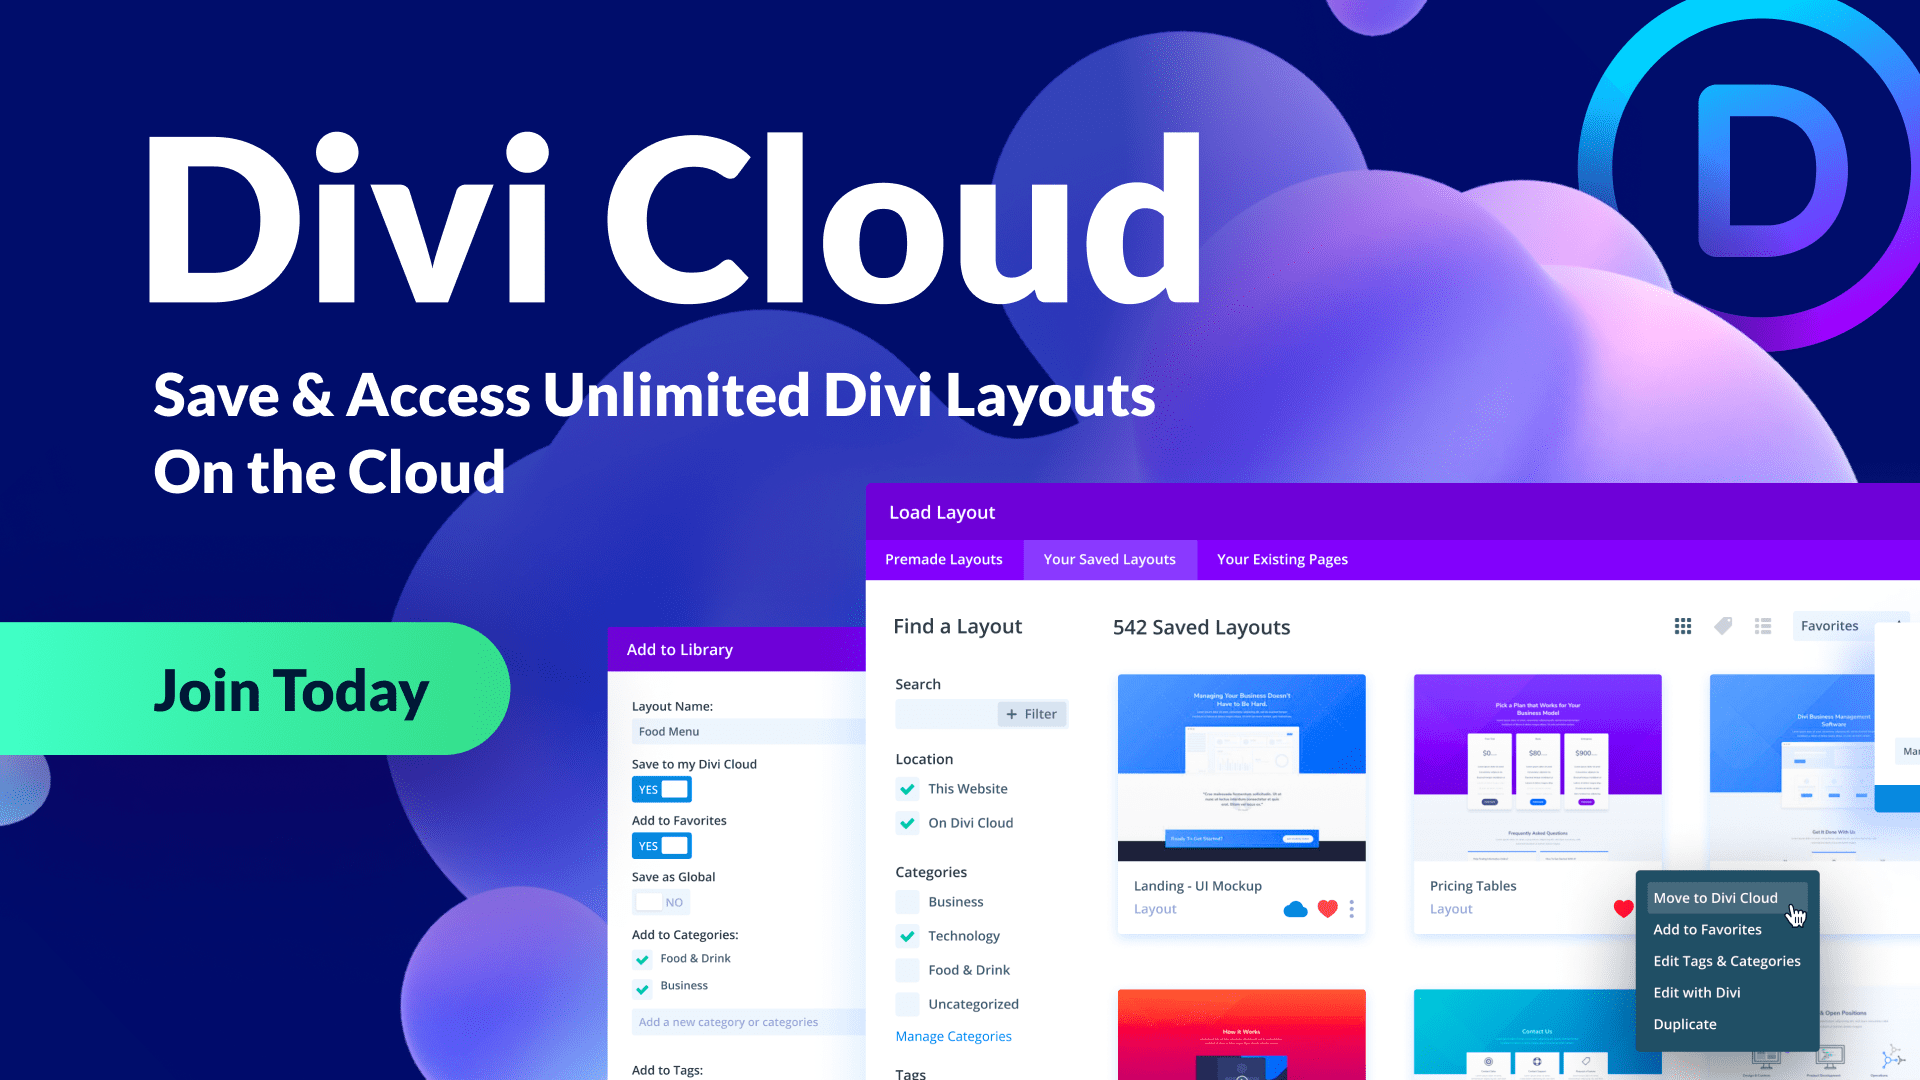 Cloud Storage For Divi Layouts And Content. Build Websites Faster With Divi Cloud.